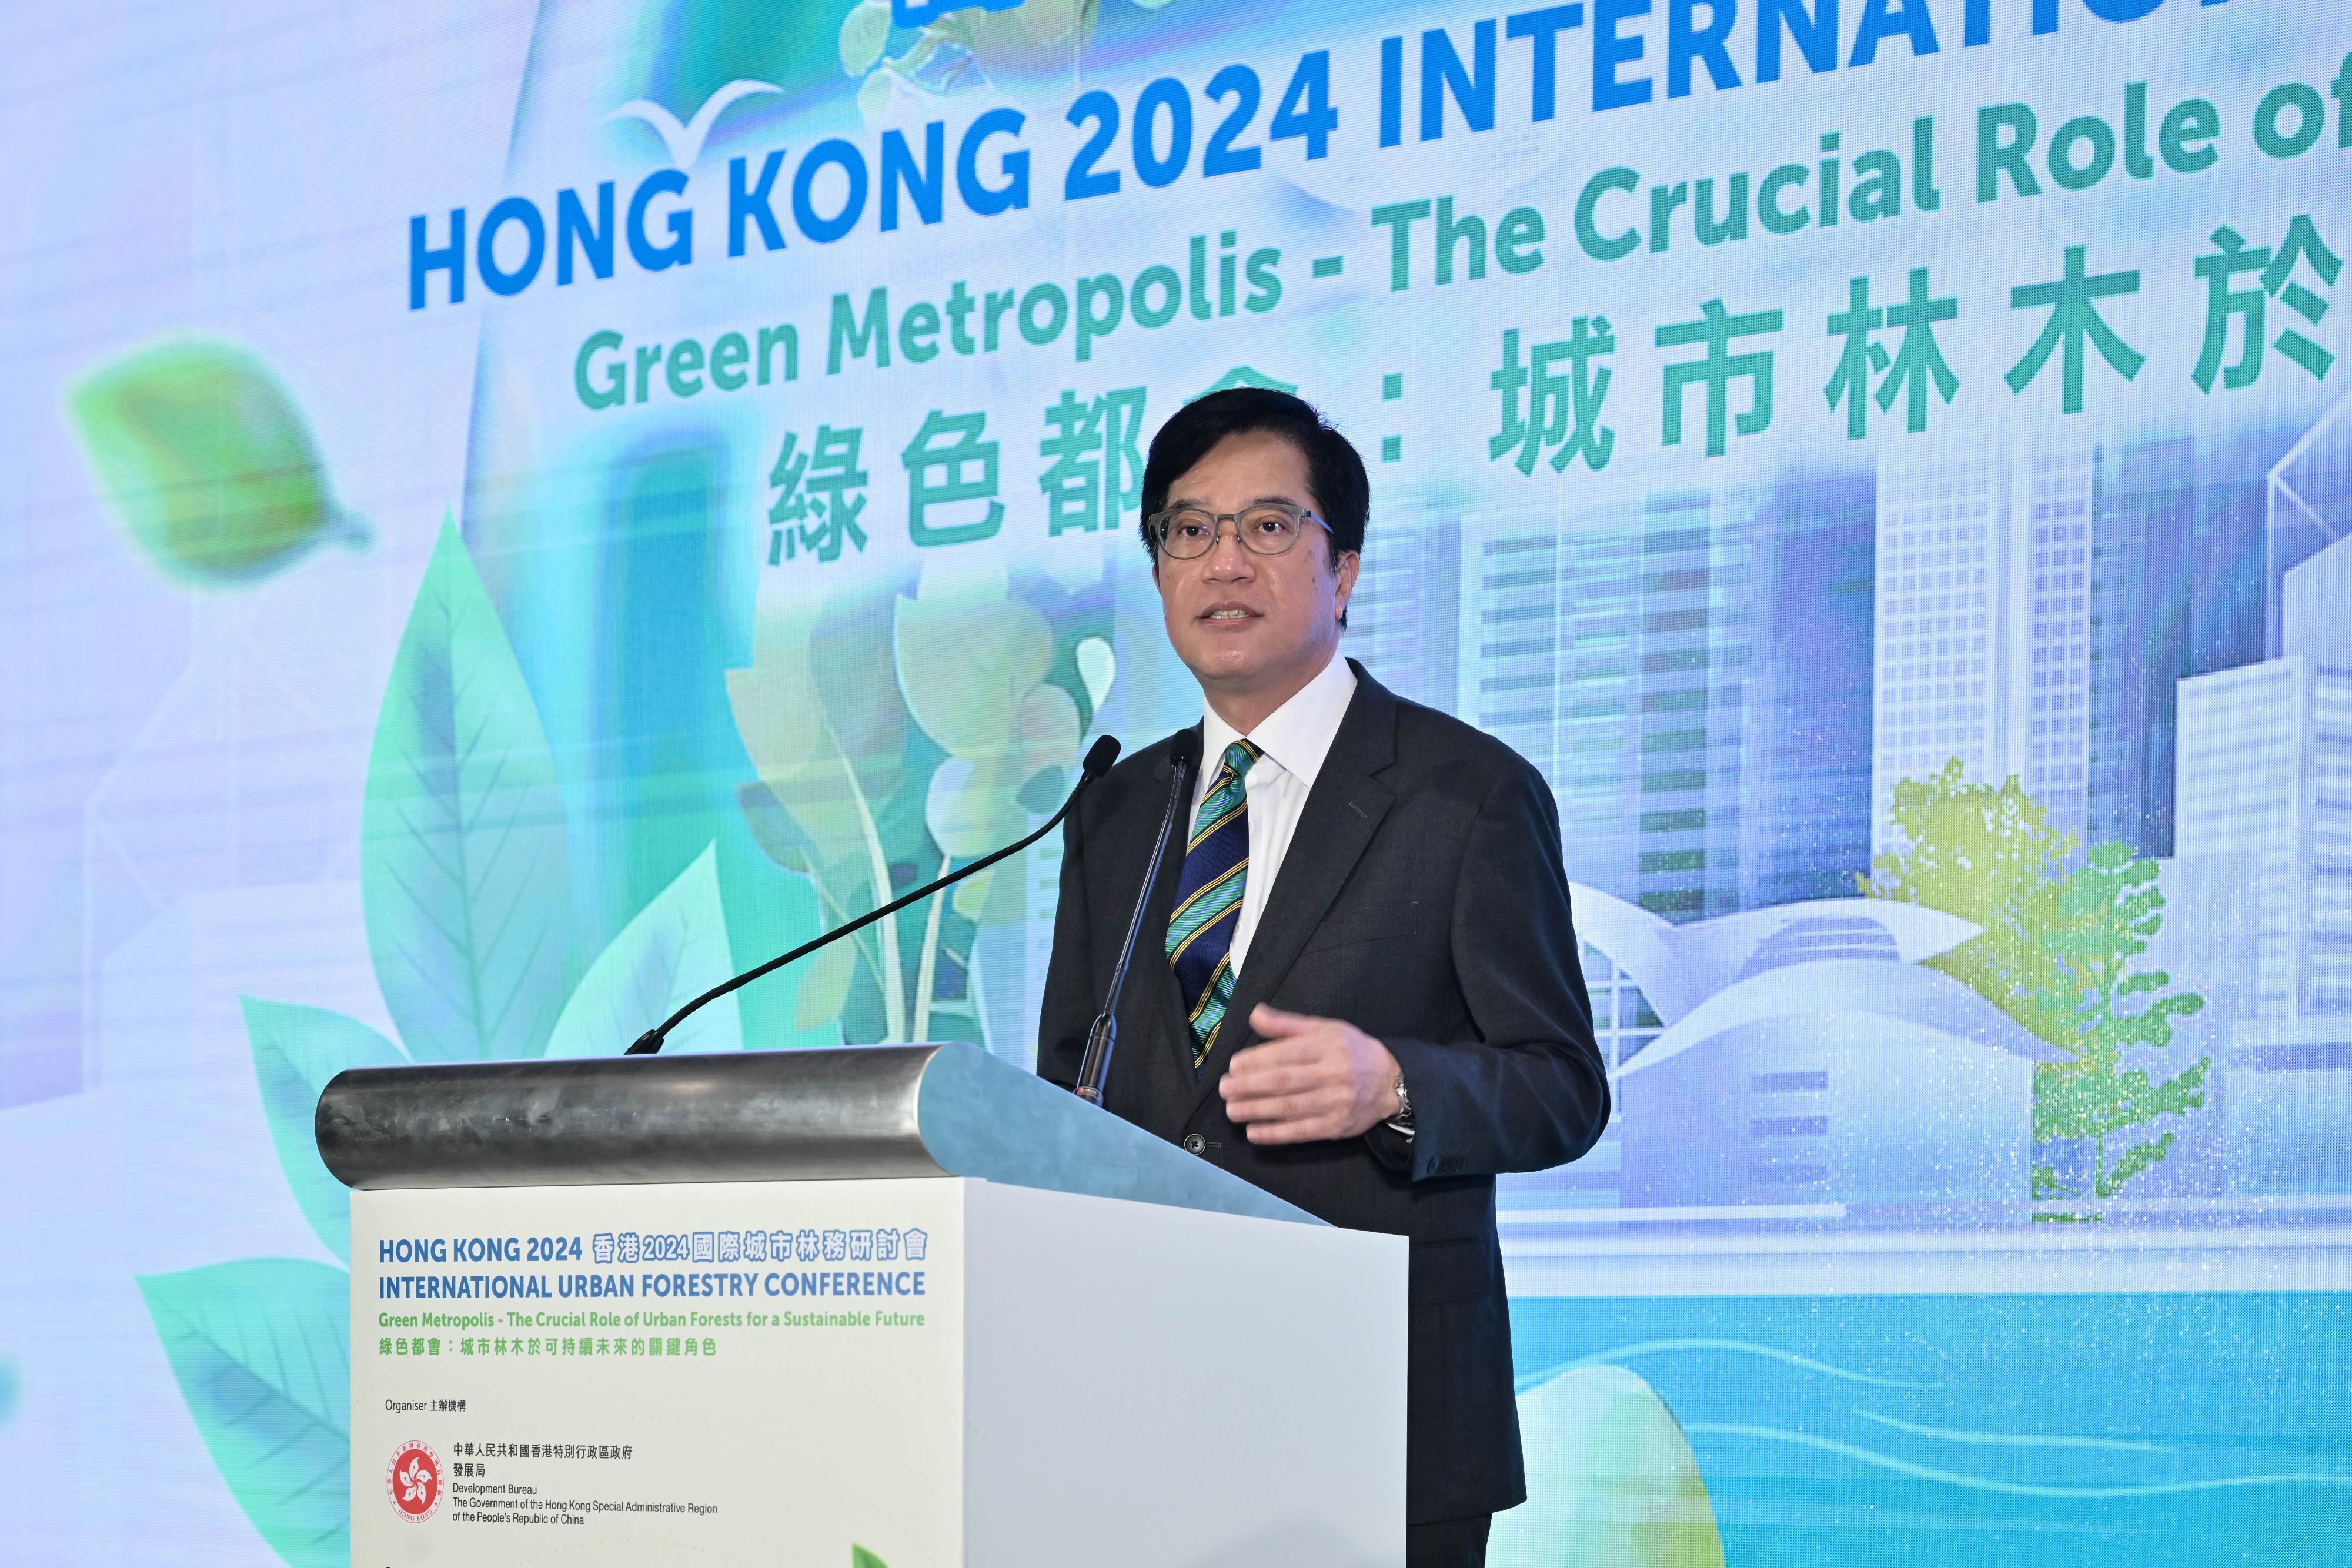 The Hong Kong 2024 International Urban Forestry Conference opened at the Hong Kong Science Park today (April 10). Photo shows the Deputy Financial Secretary, Mr Michael Wong, delivering an opening address at the opening ceremony.